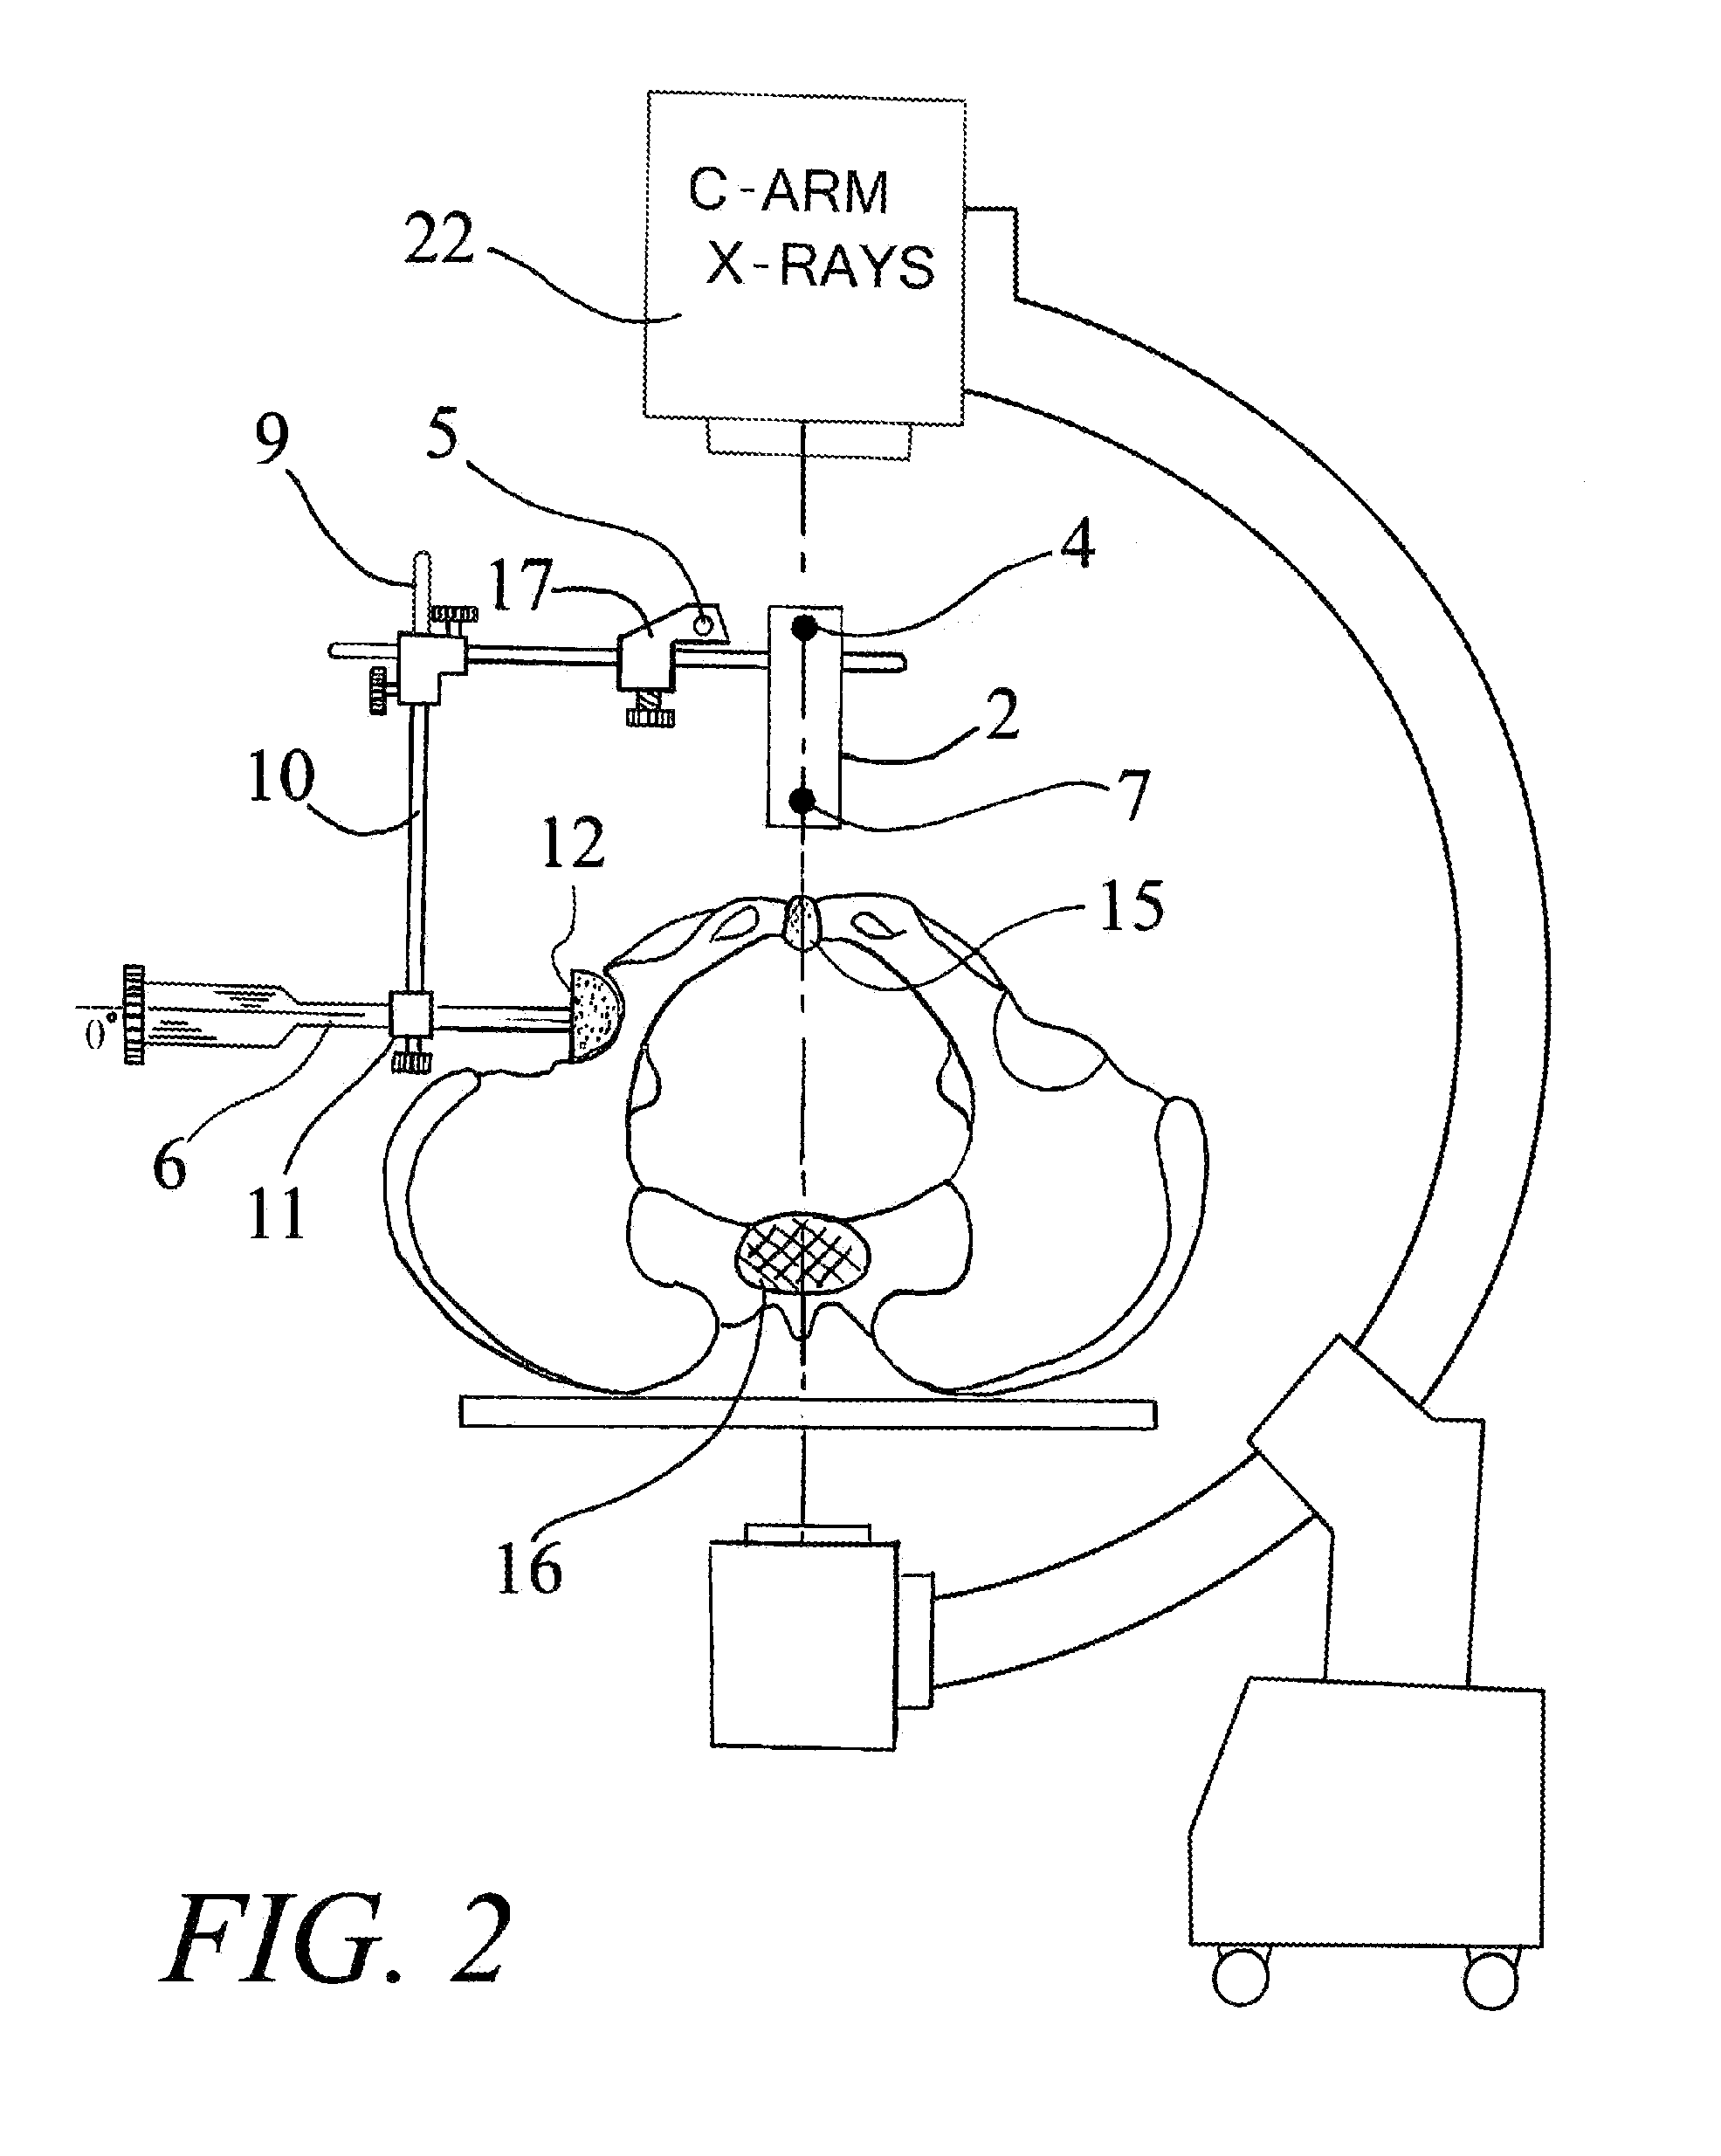 Acetabular cup device and method thereof